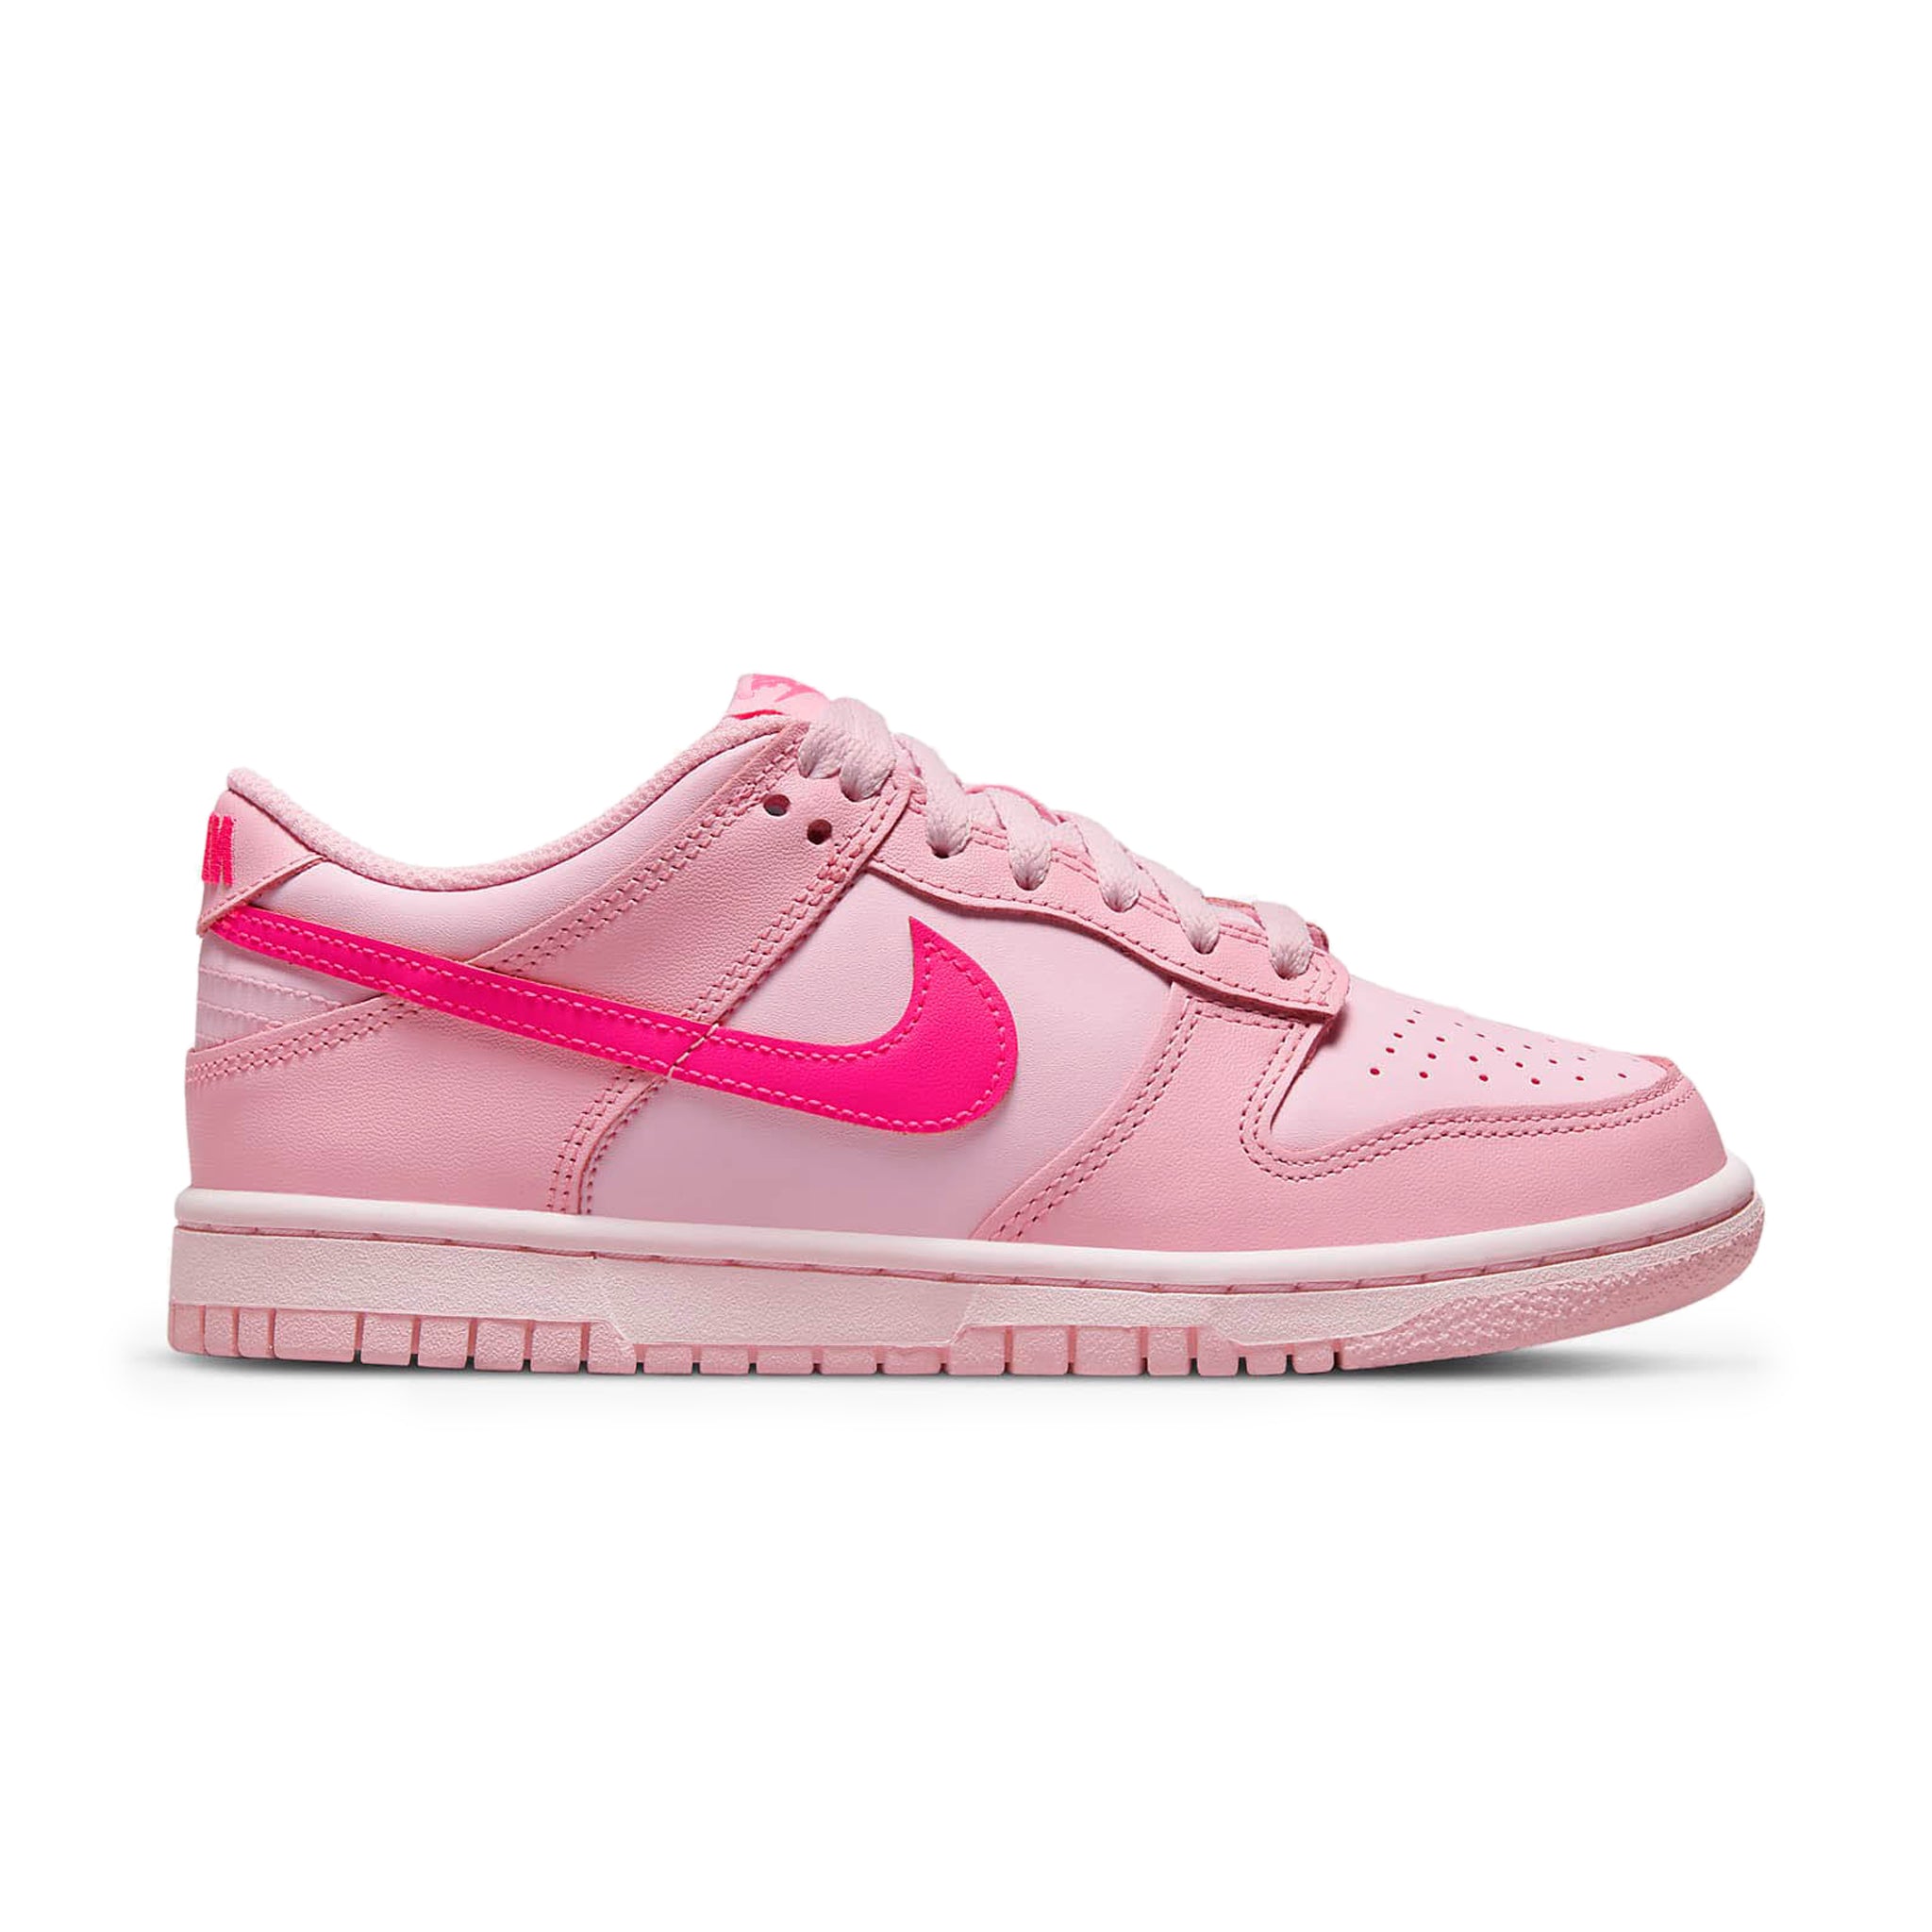 Side view of Oh no nike Triple Pink (GS) DH9765-600